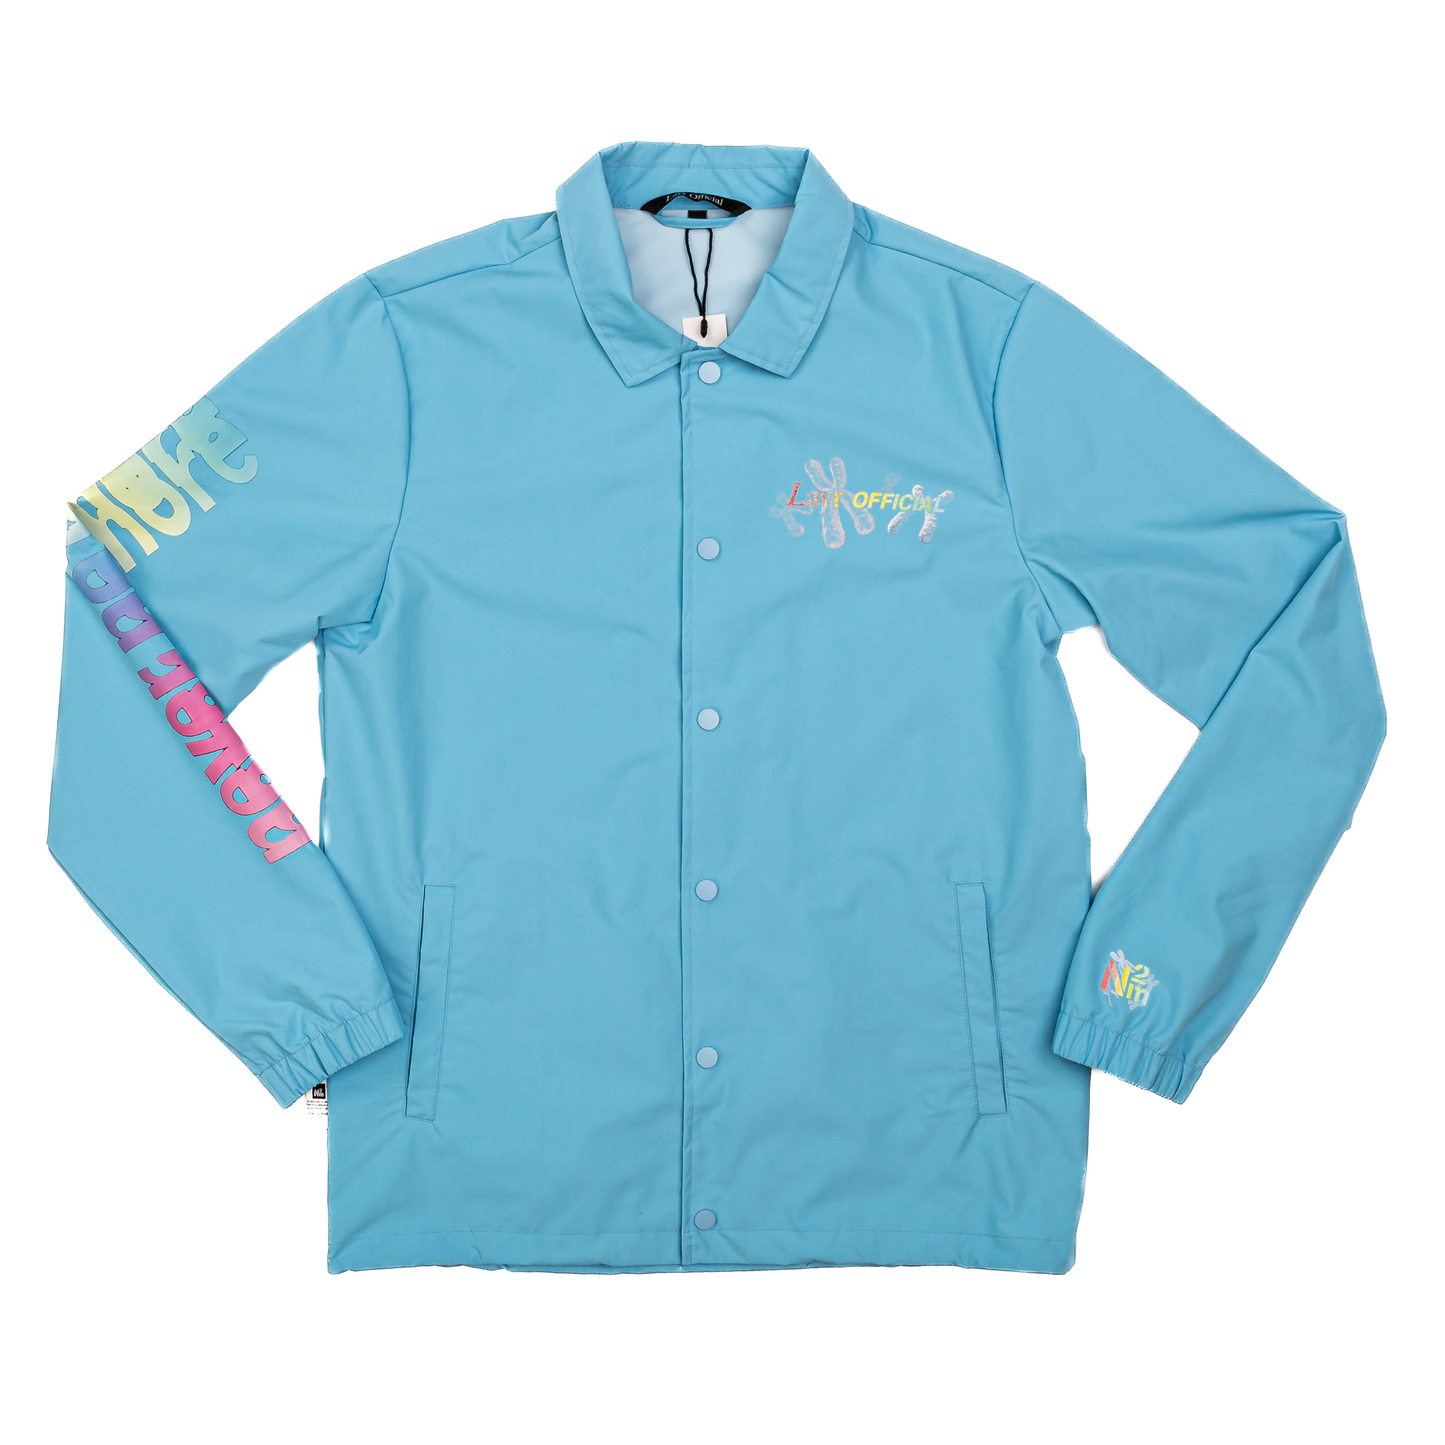 Jacket, Washed Blue - Layr Official